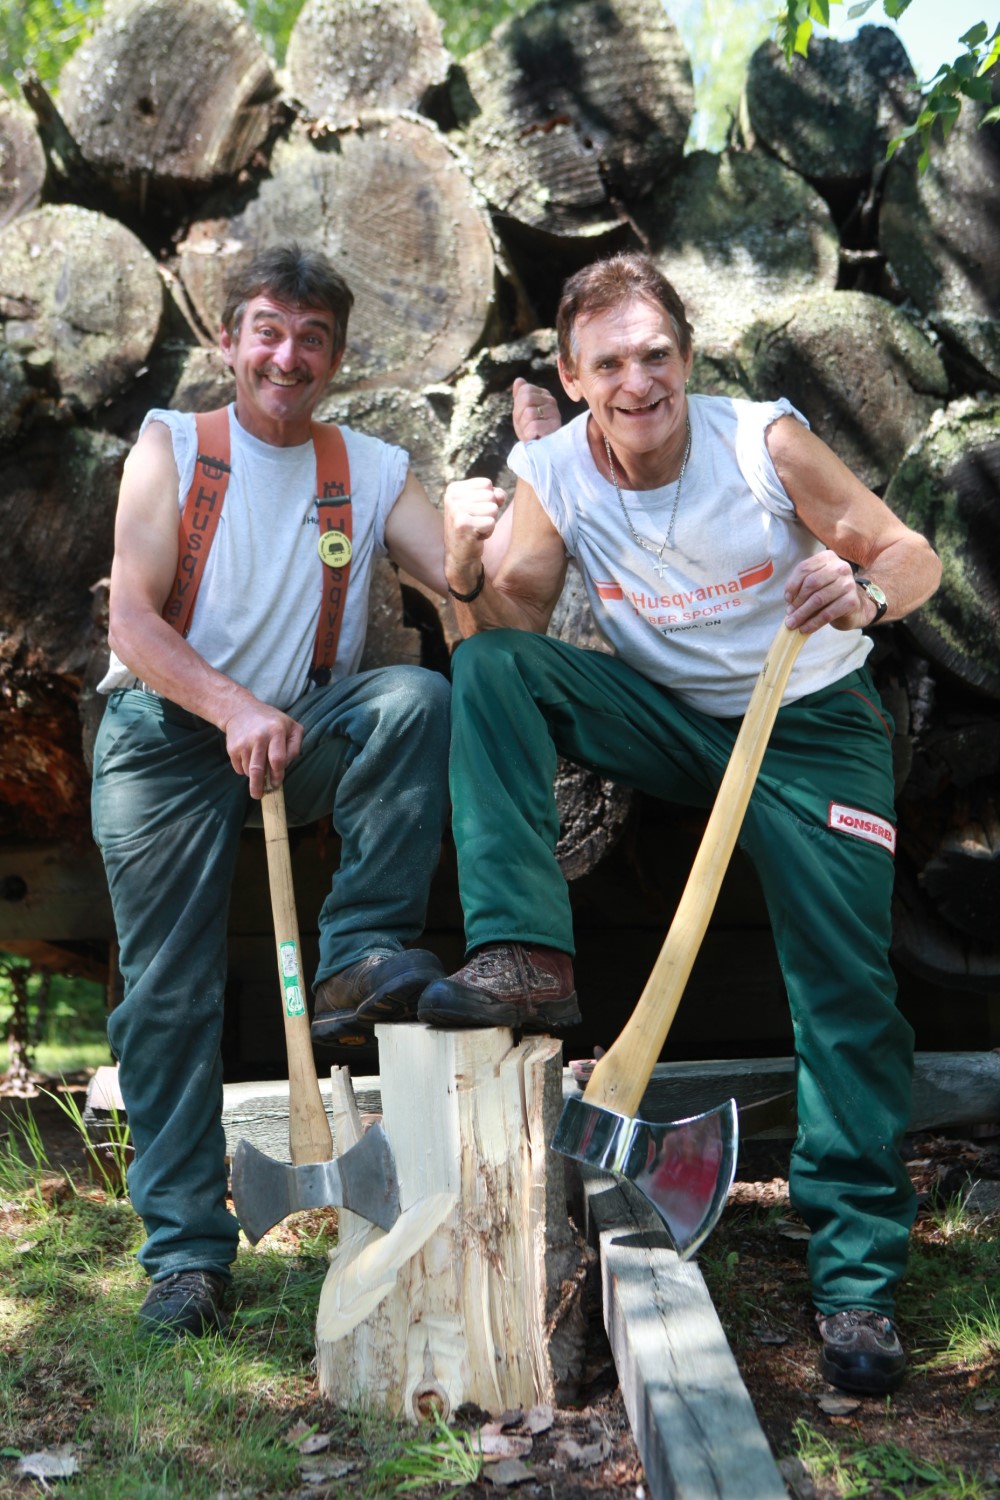 Two people wearing red suspenders and green pants, each with one leg up on a piece of chopped wood. The are both leaning against the handles of axes.